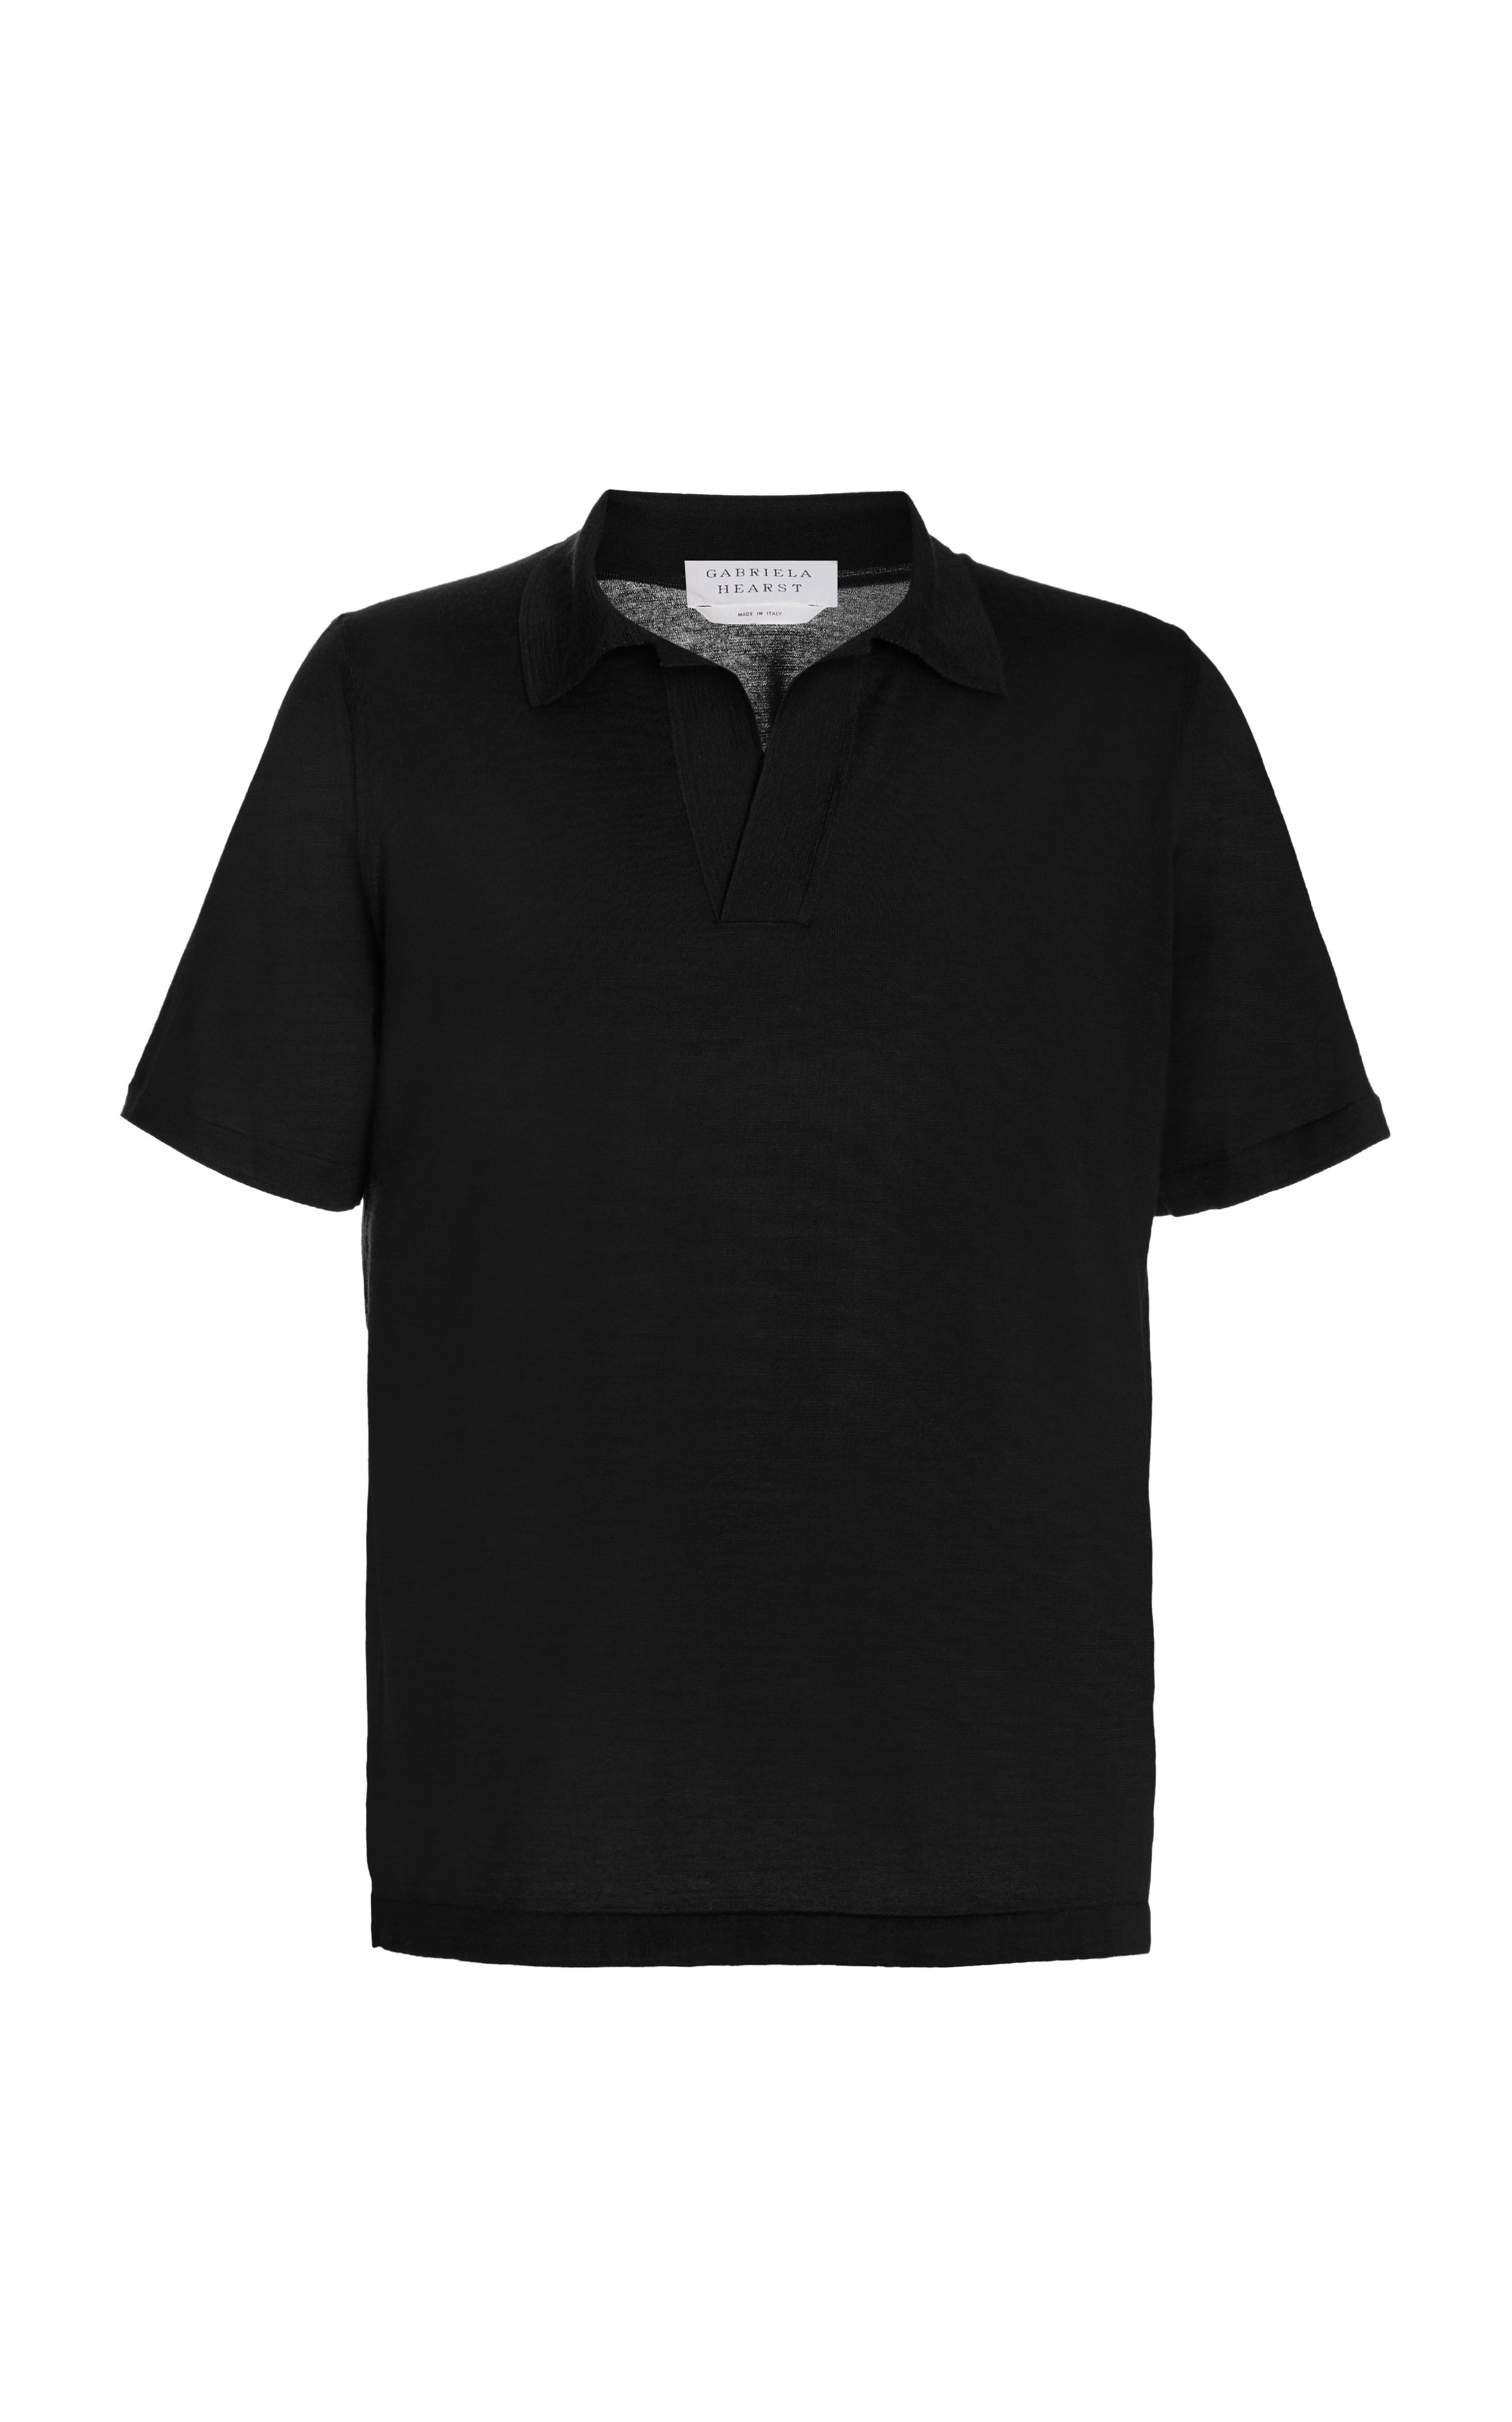 Stendhal Knit Short Sleeve Polo in Black Cashmere - 1